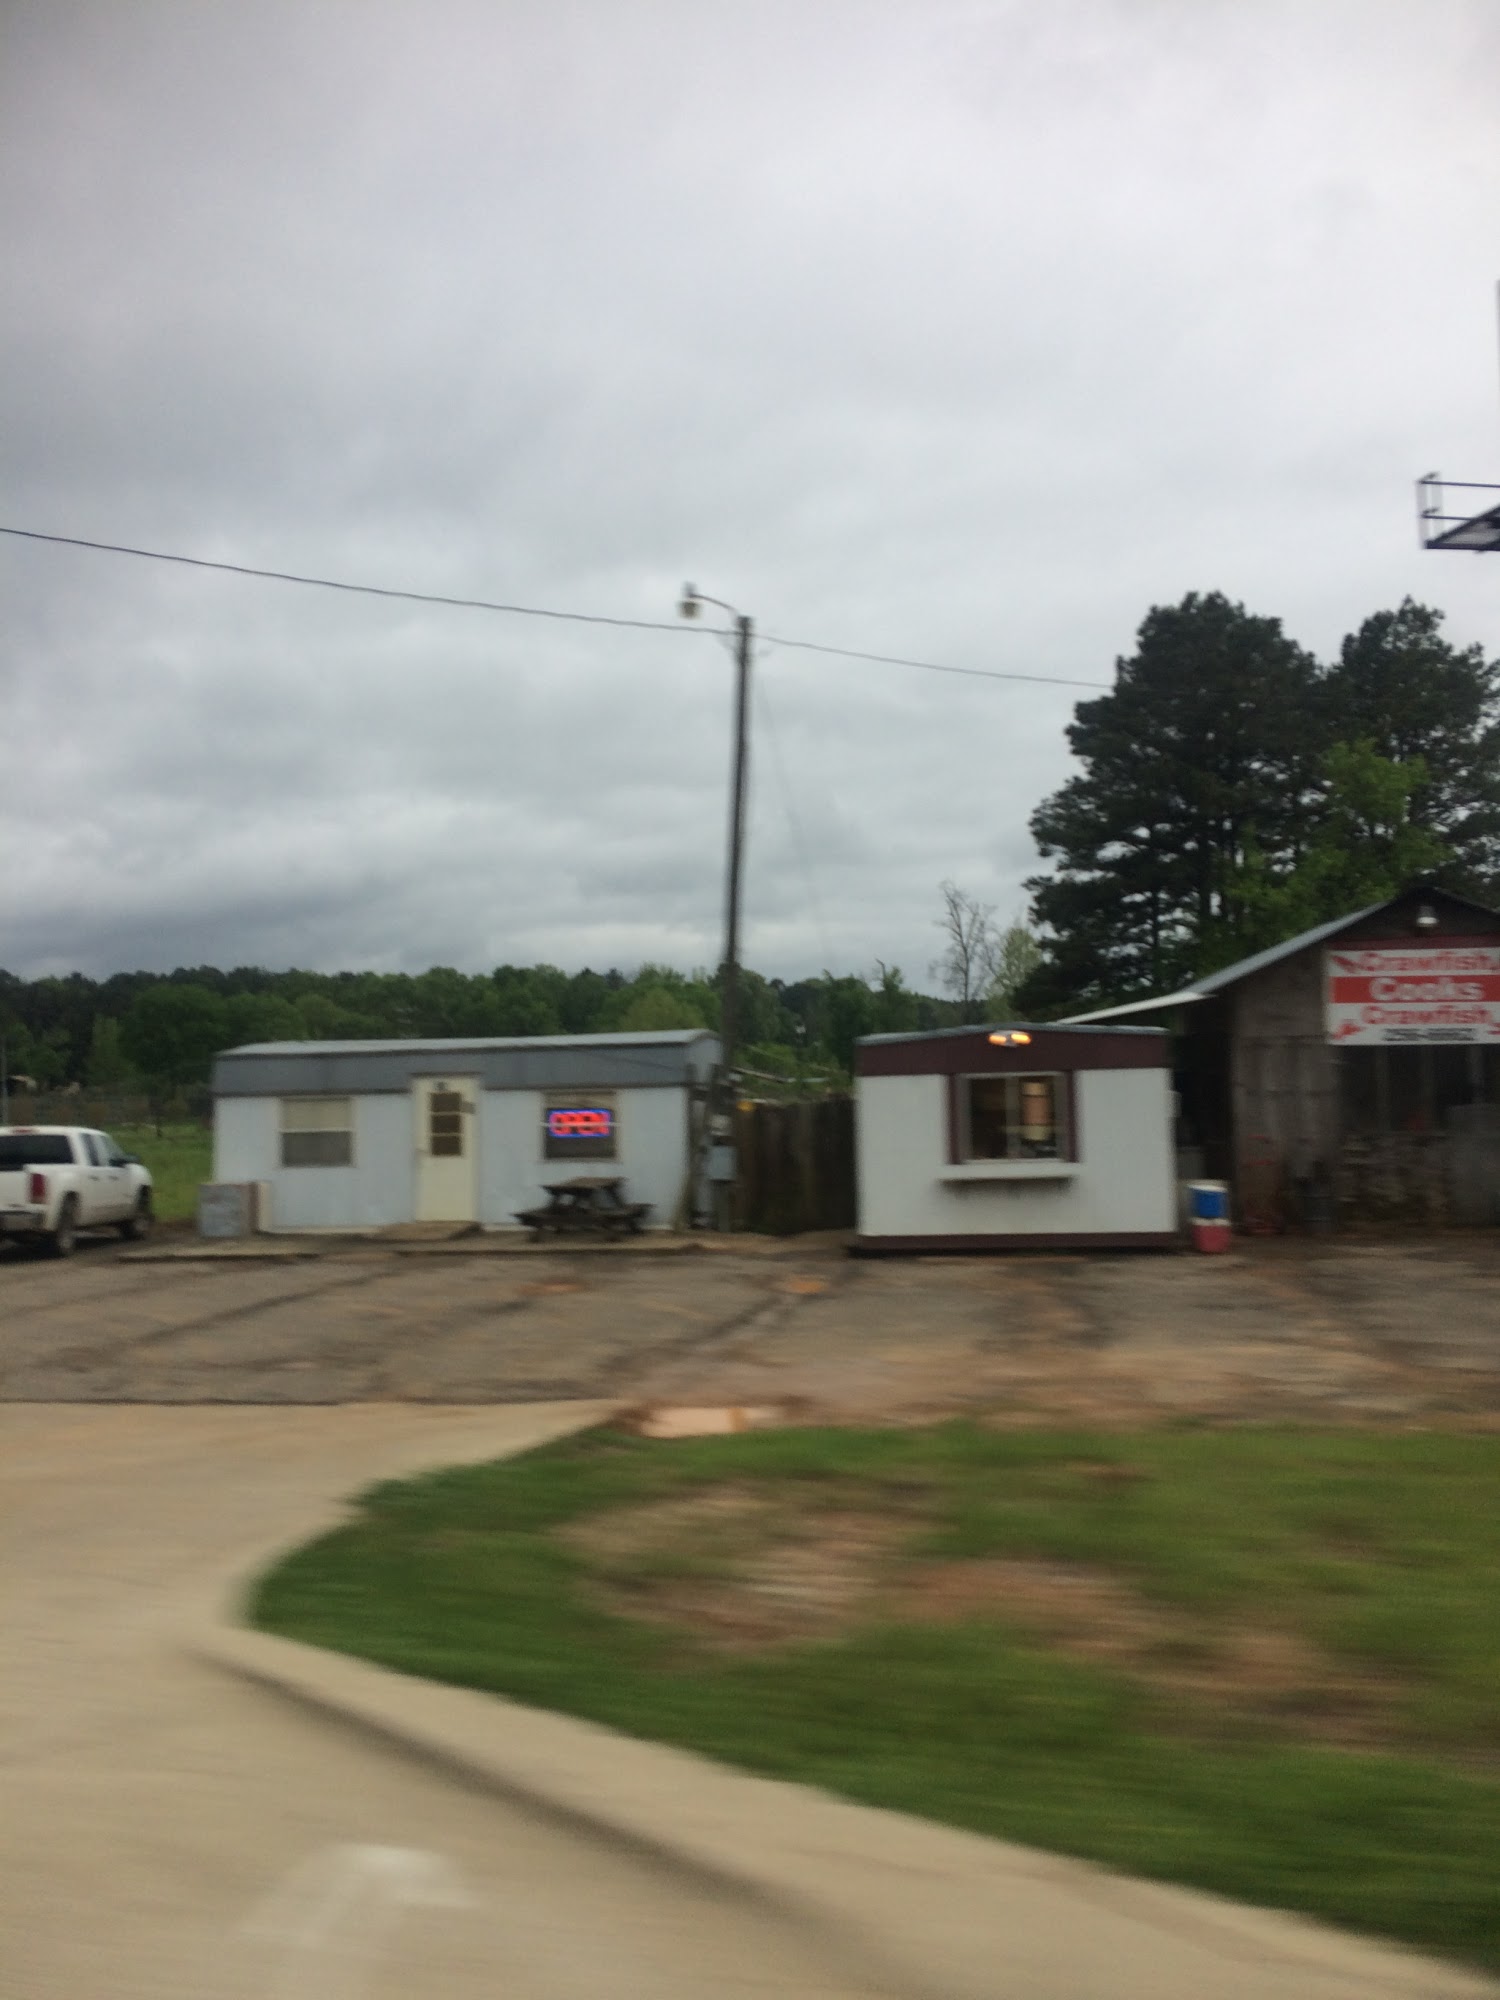 Cook Crawfish Hole /James Cook Used Cars